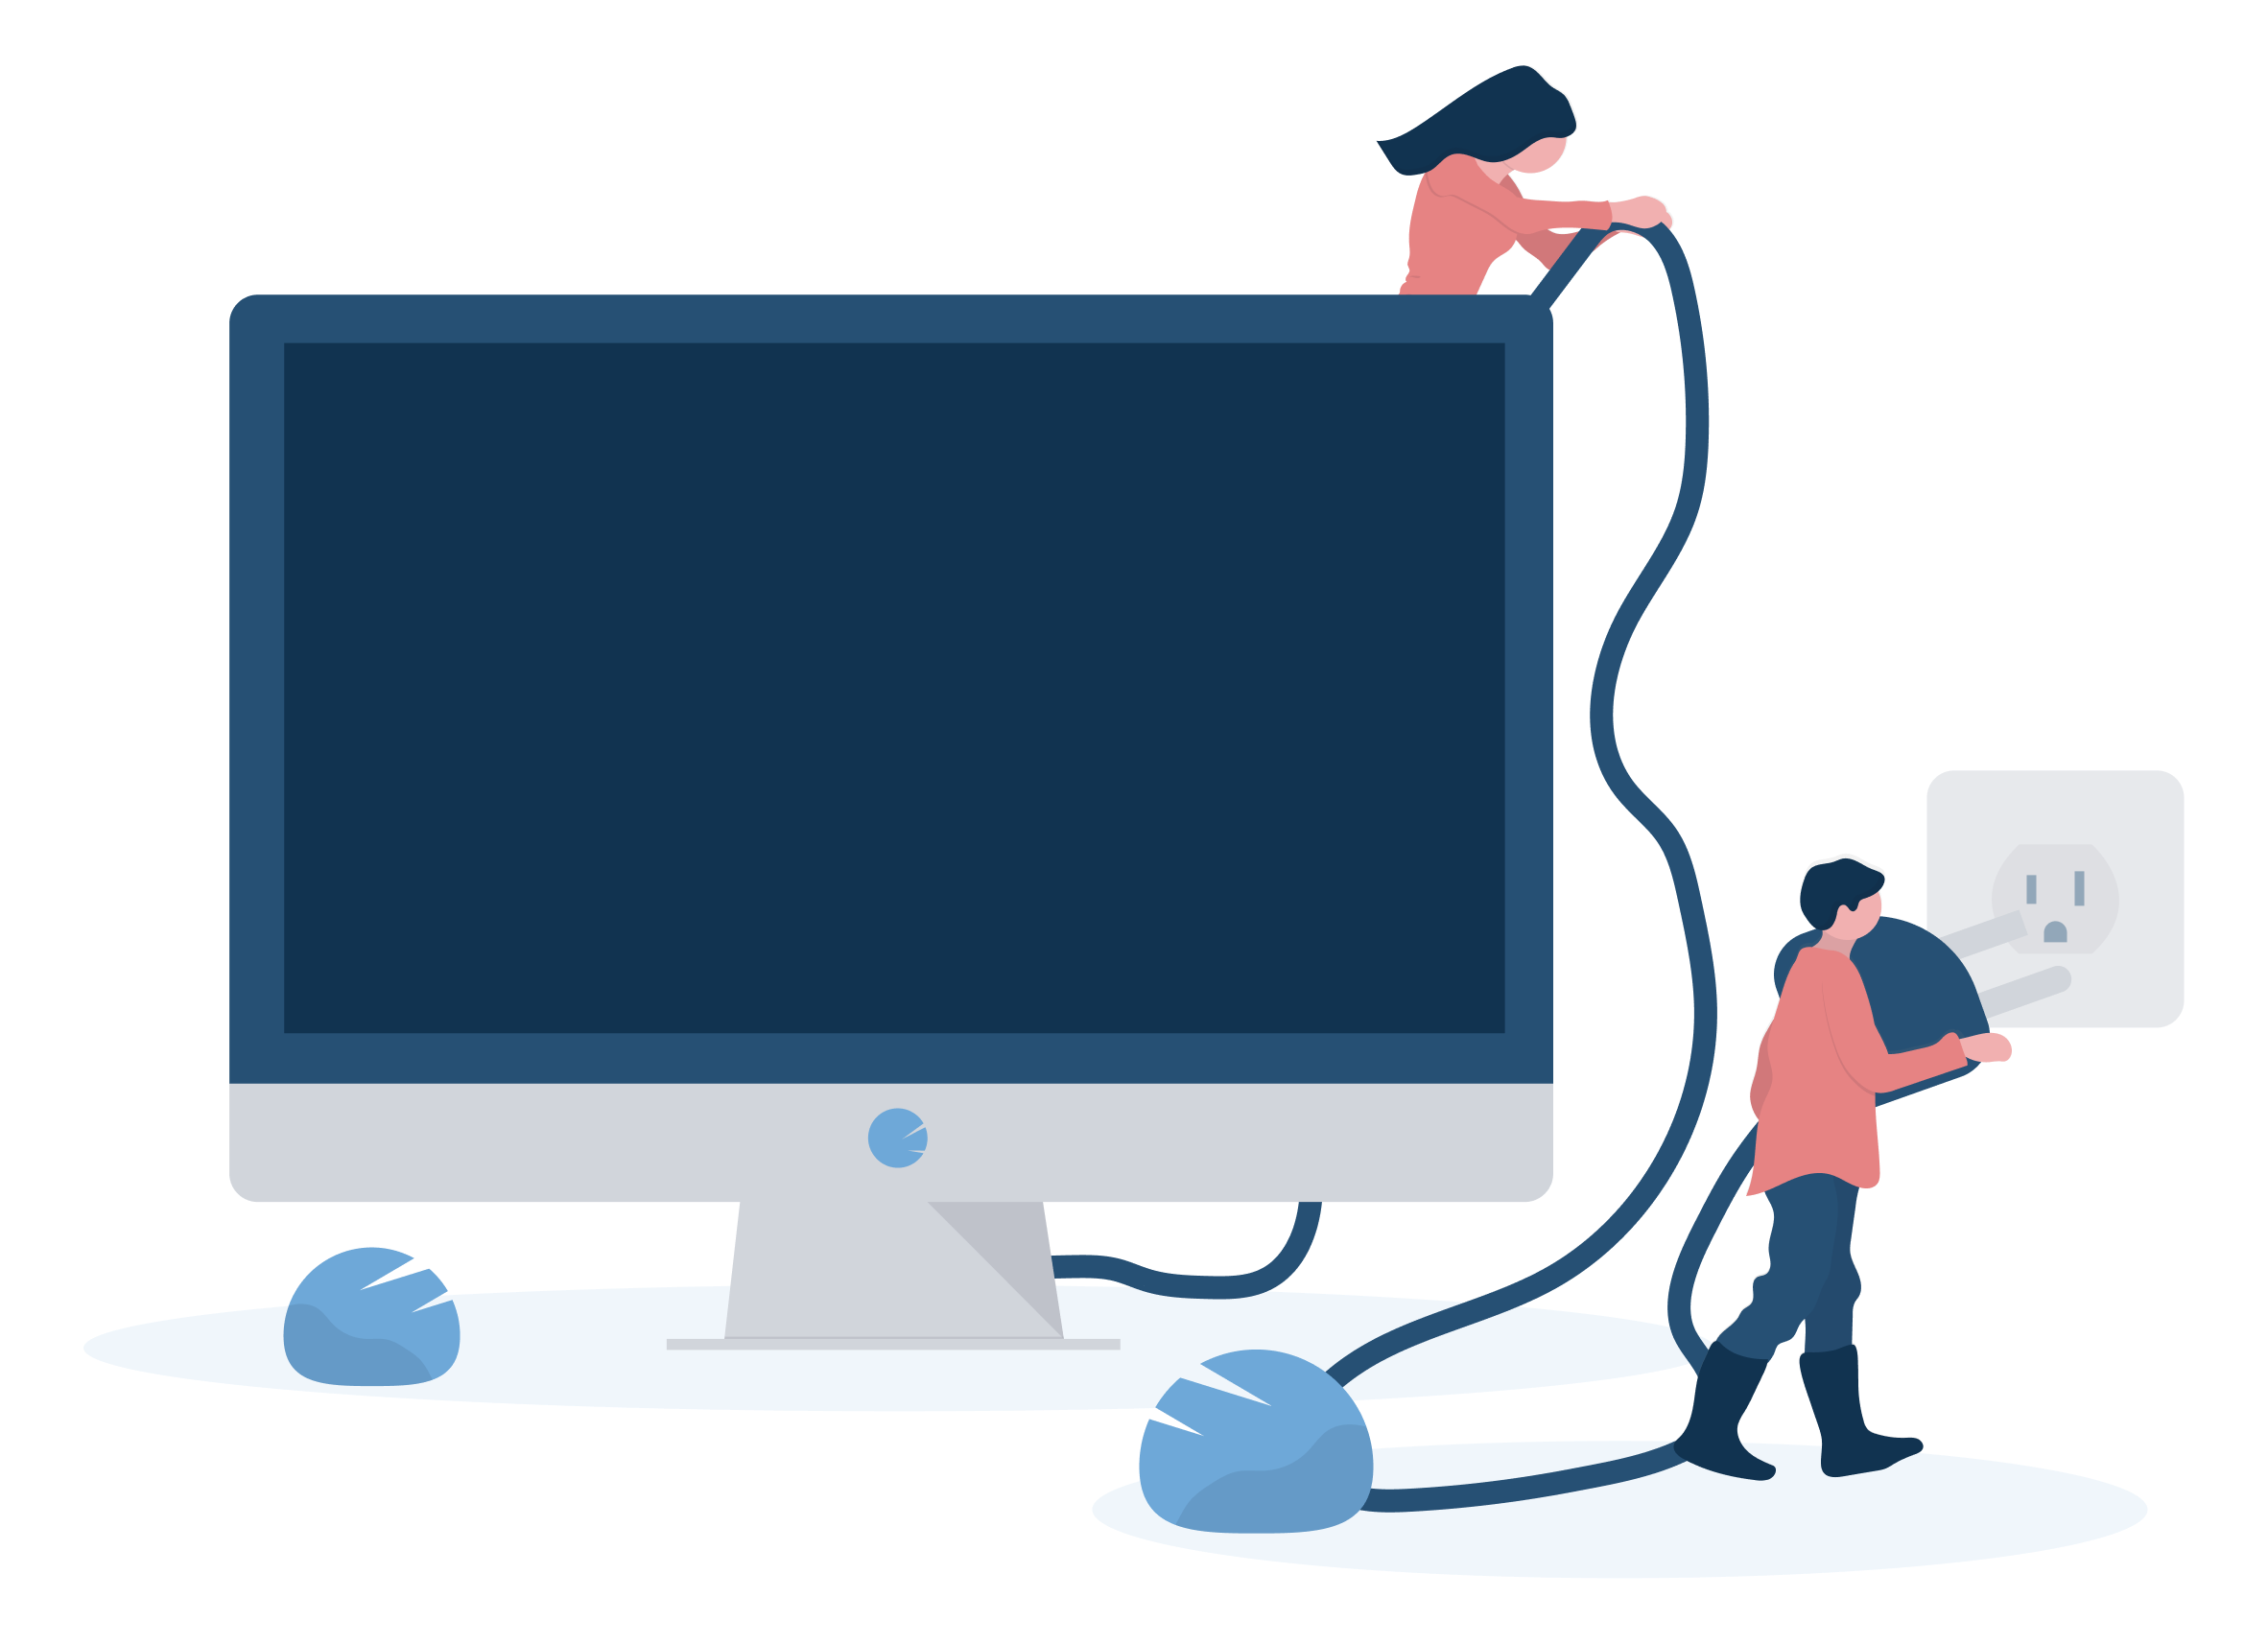 Illustration of people plugging in a large computer monitor